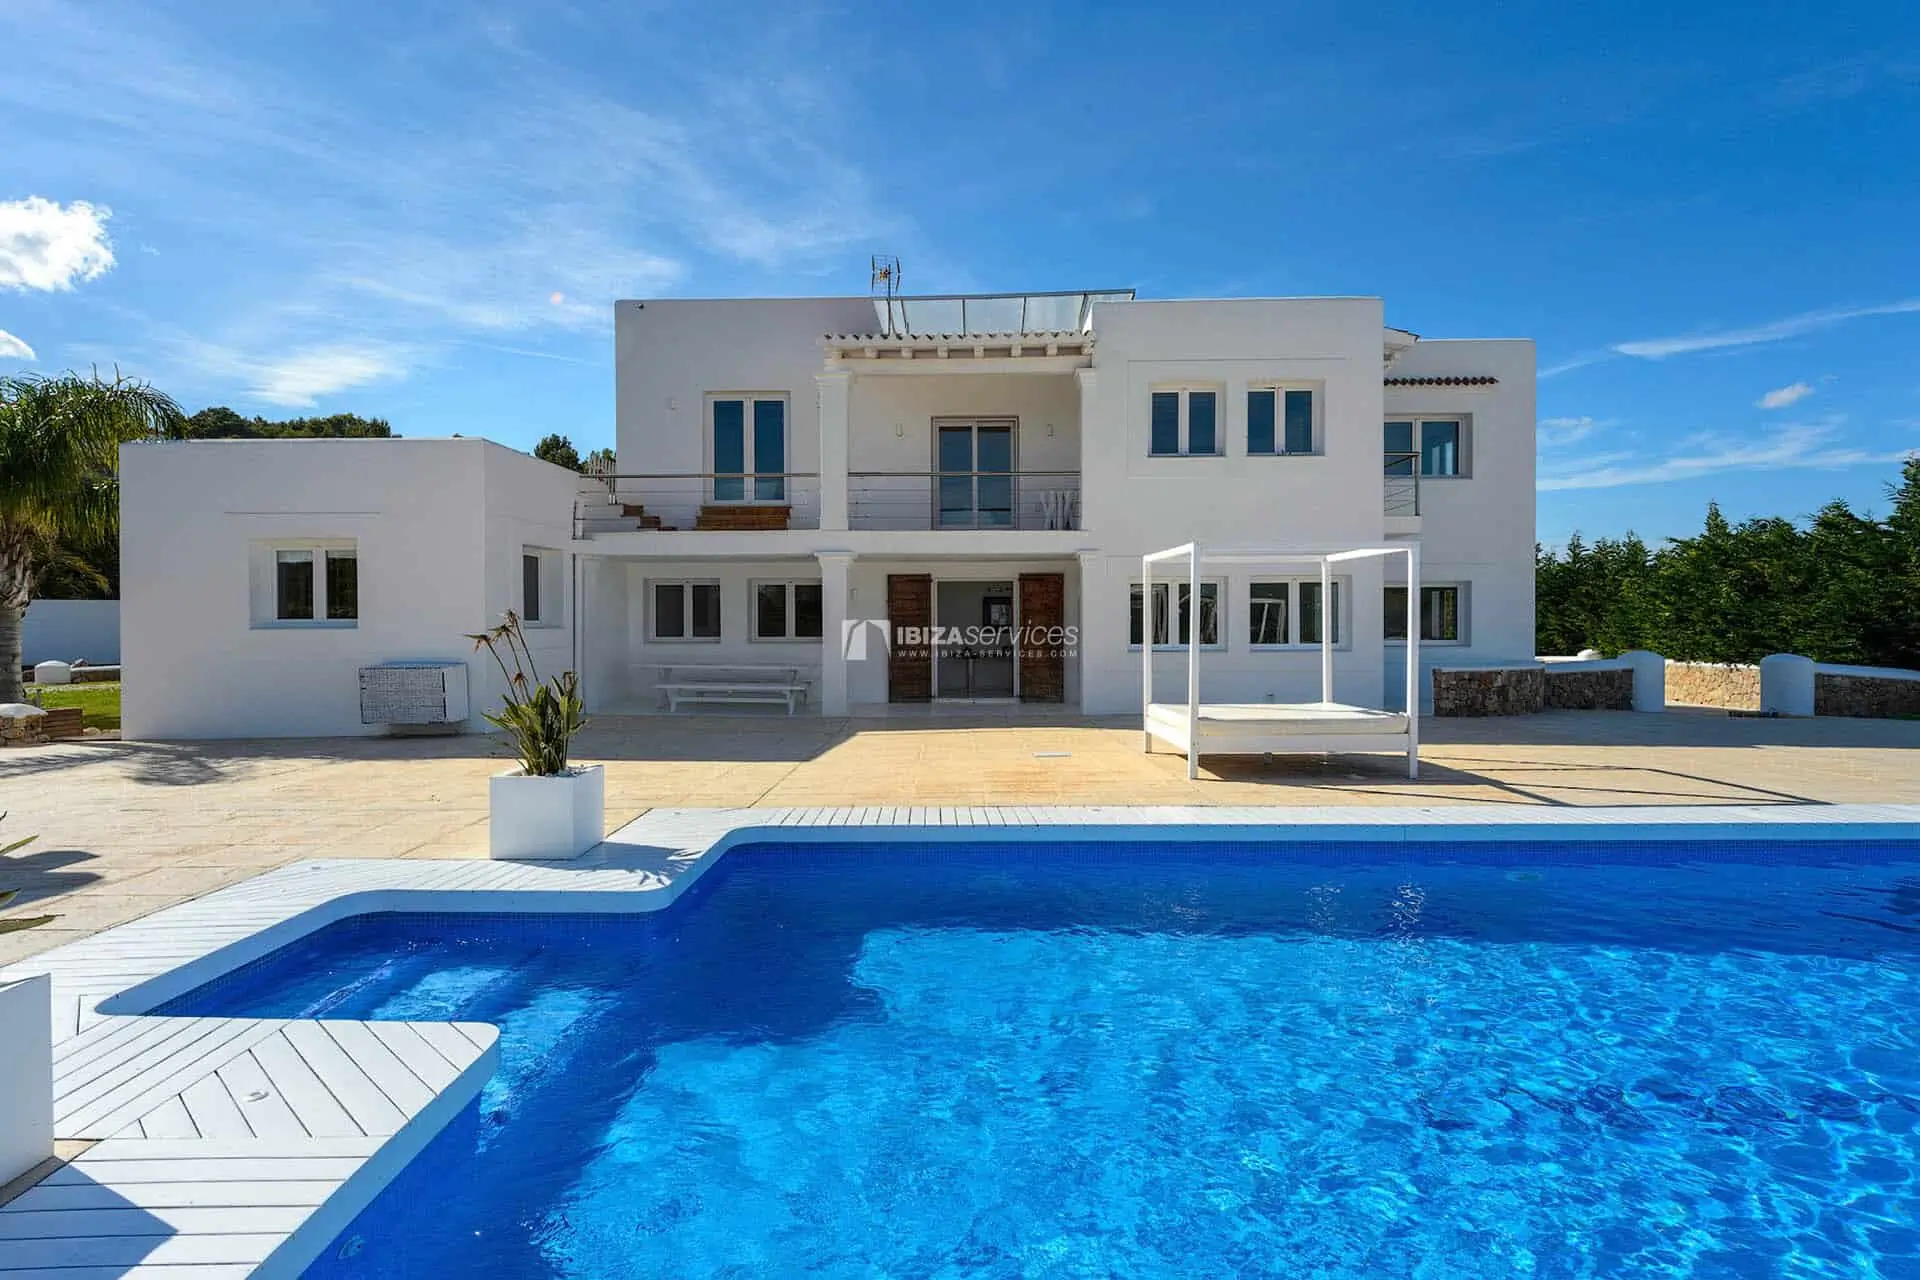 St Eulalia 7 bedroom holiday villa for rent